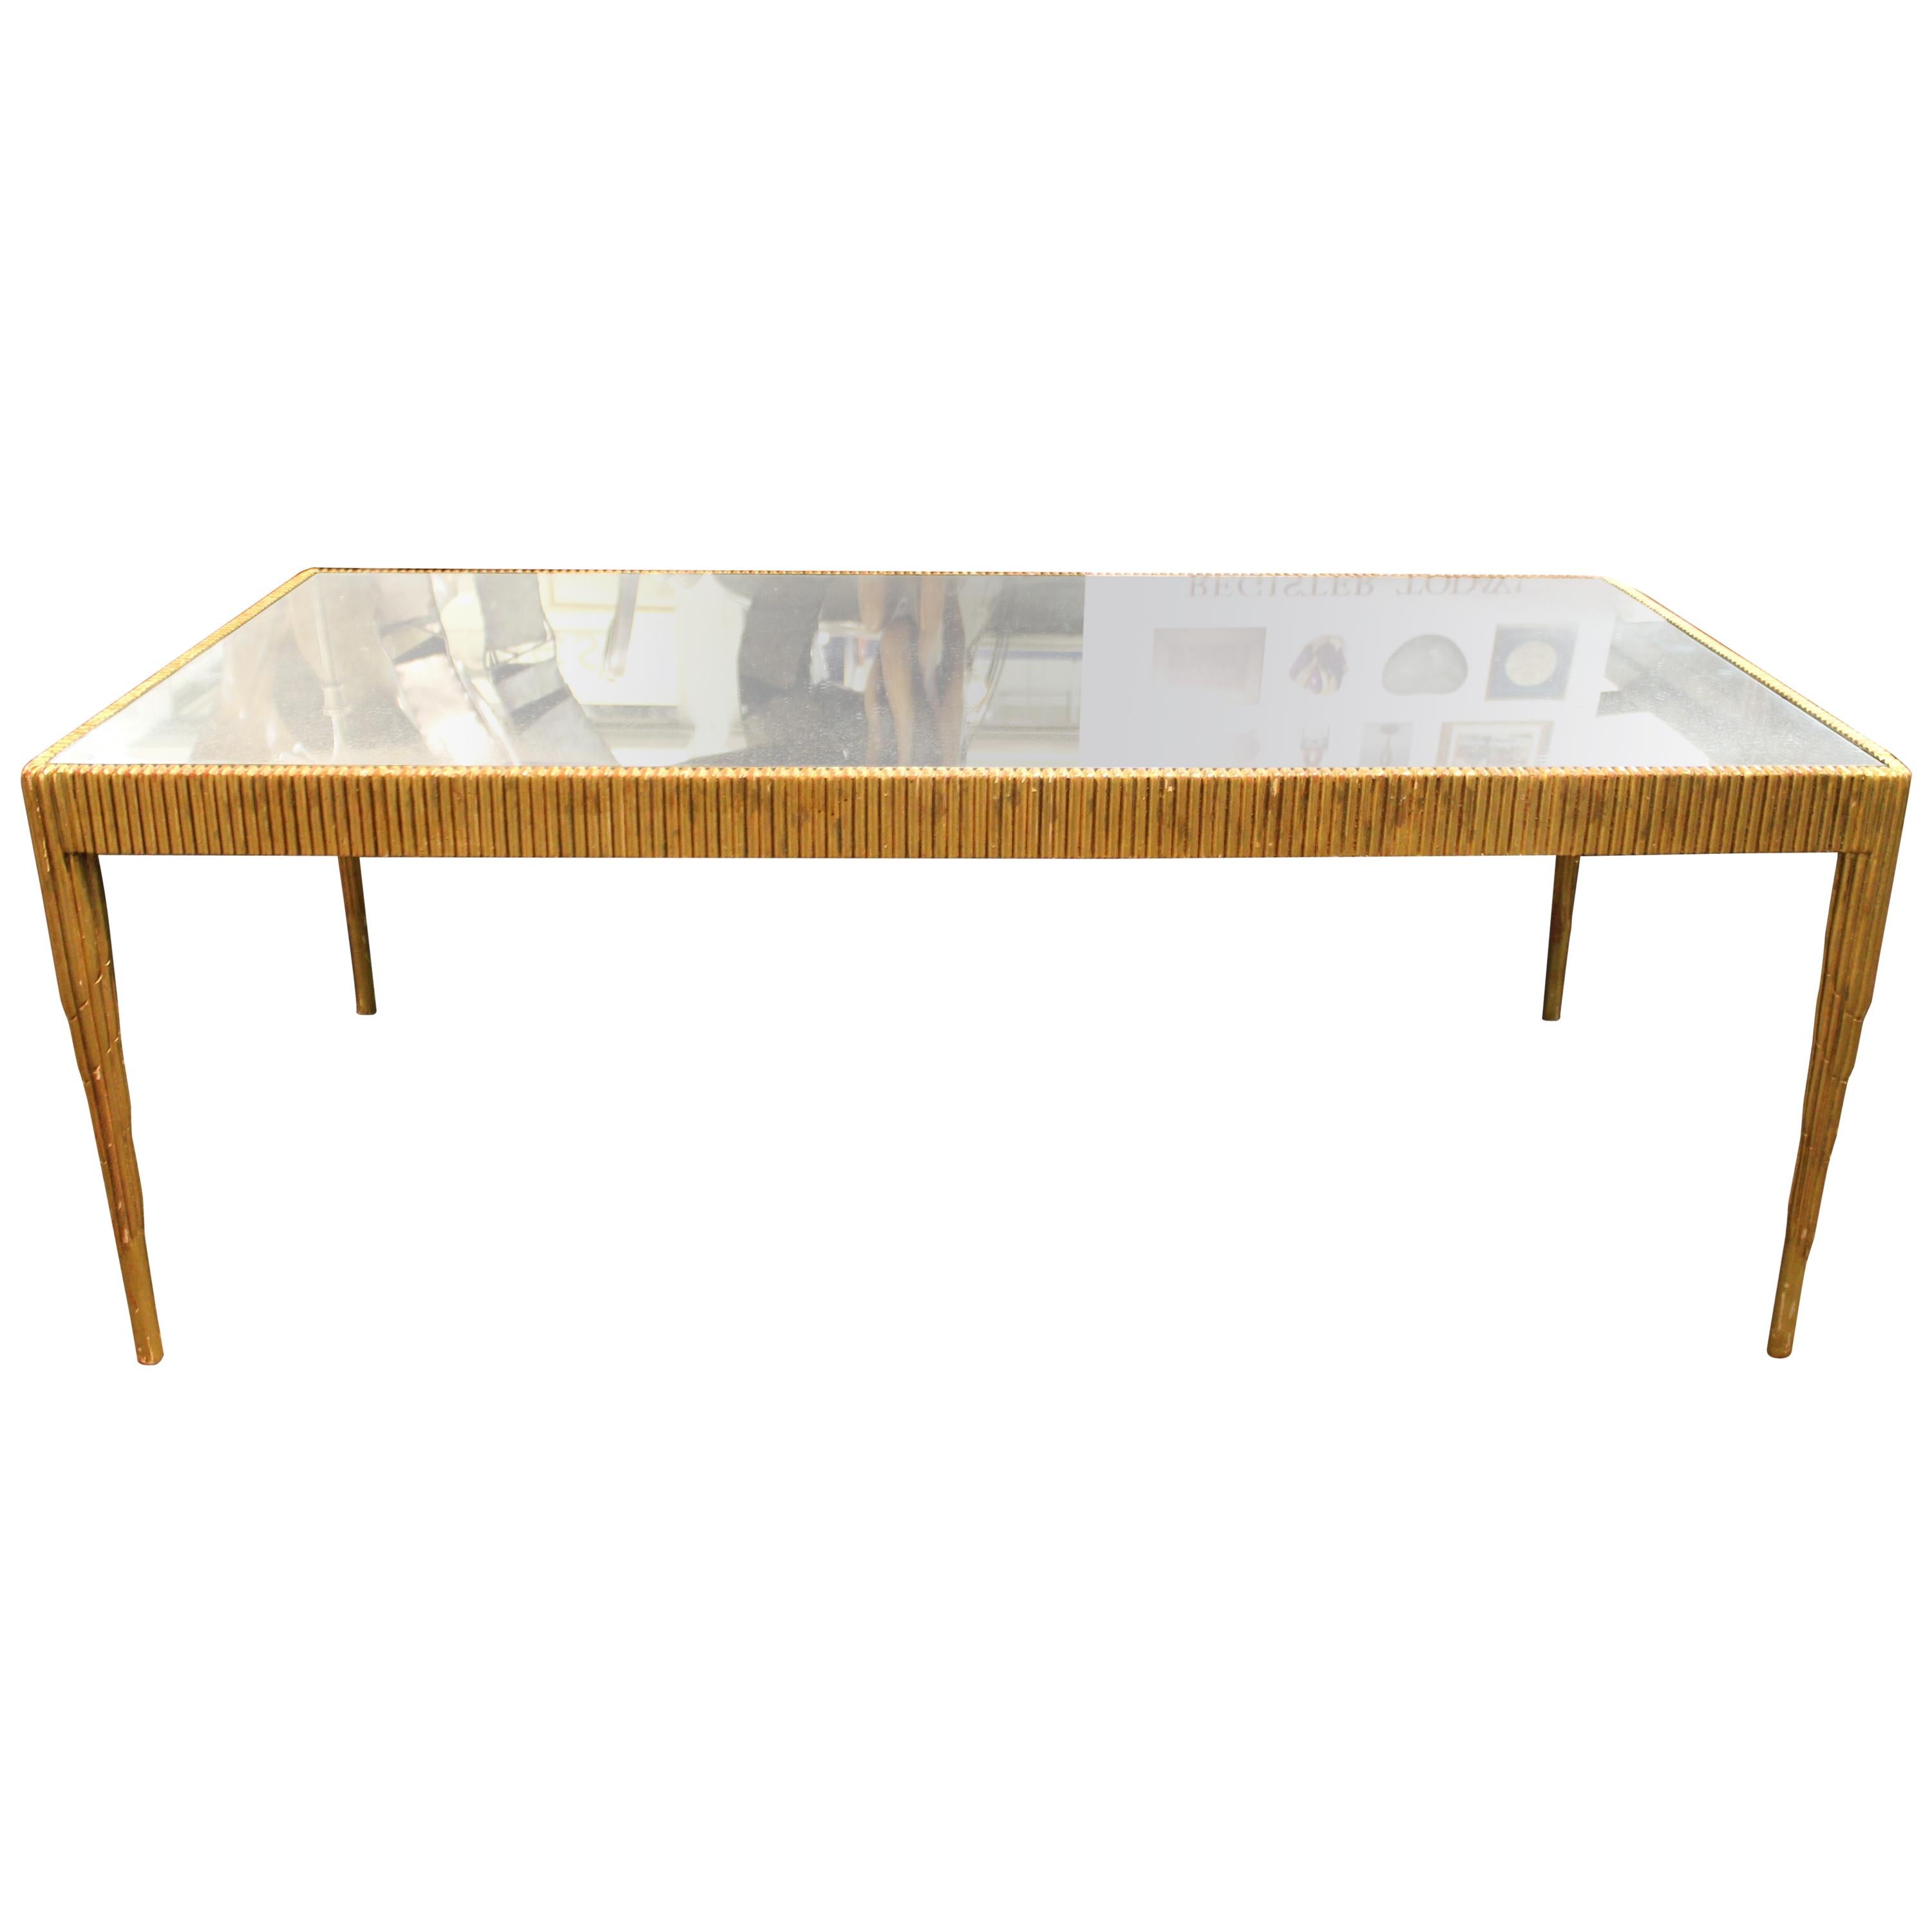 Armand-Albert Rateau Attr. French Art Deco Giltwood Cocktail Table w Mirror Top